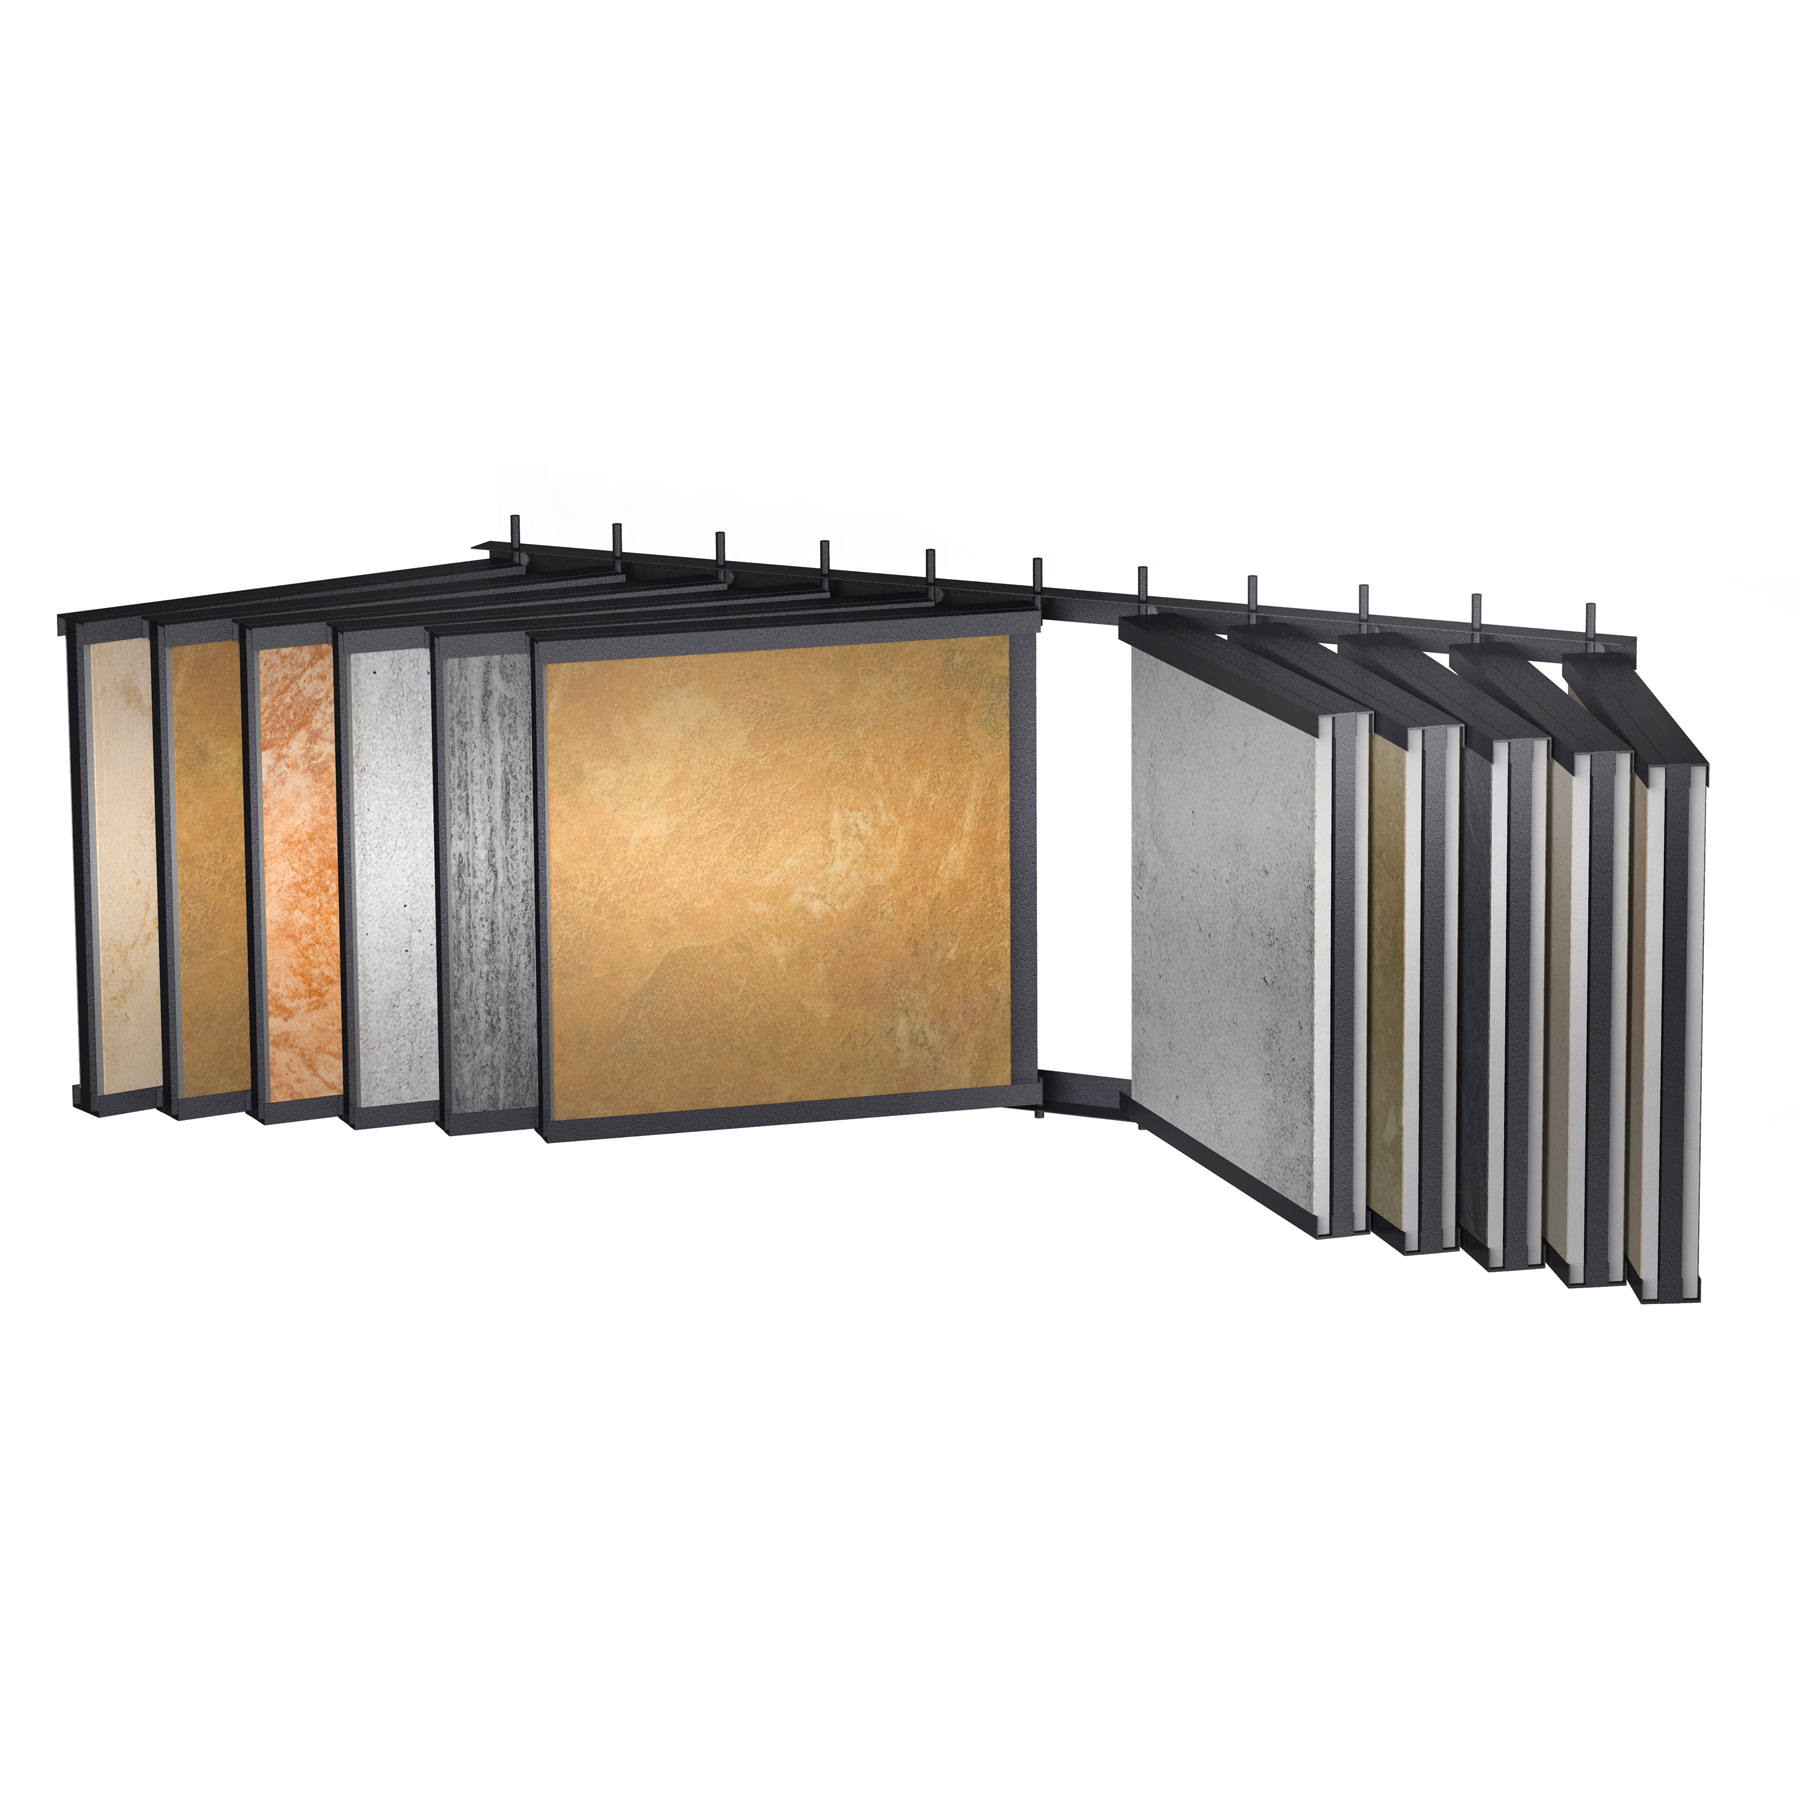 Square Steel Tube Wall Mount Track Wing Rack Style Channel System Displays Tile Hardwood Flooring on Showroom Walls